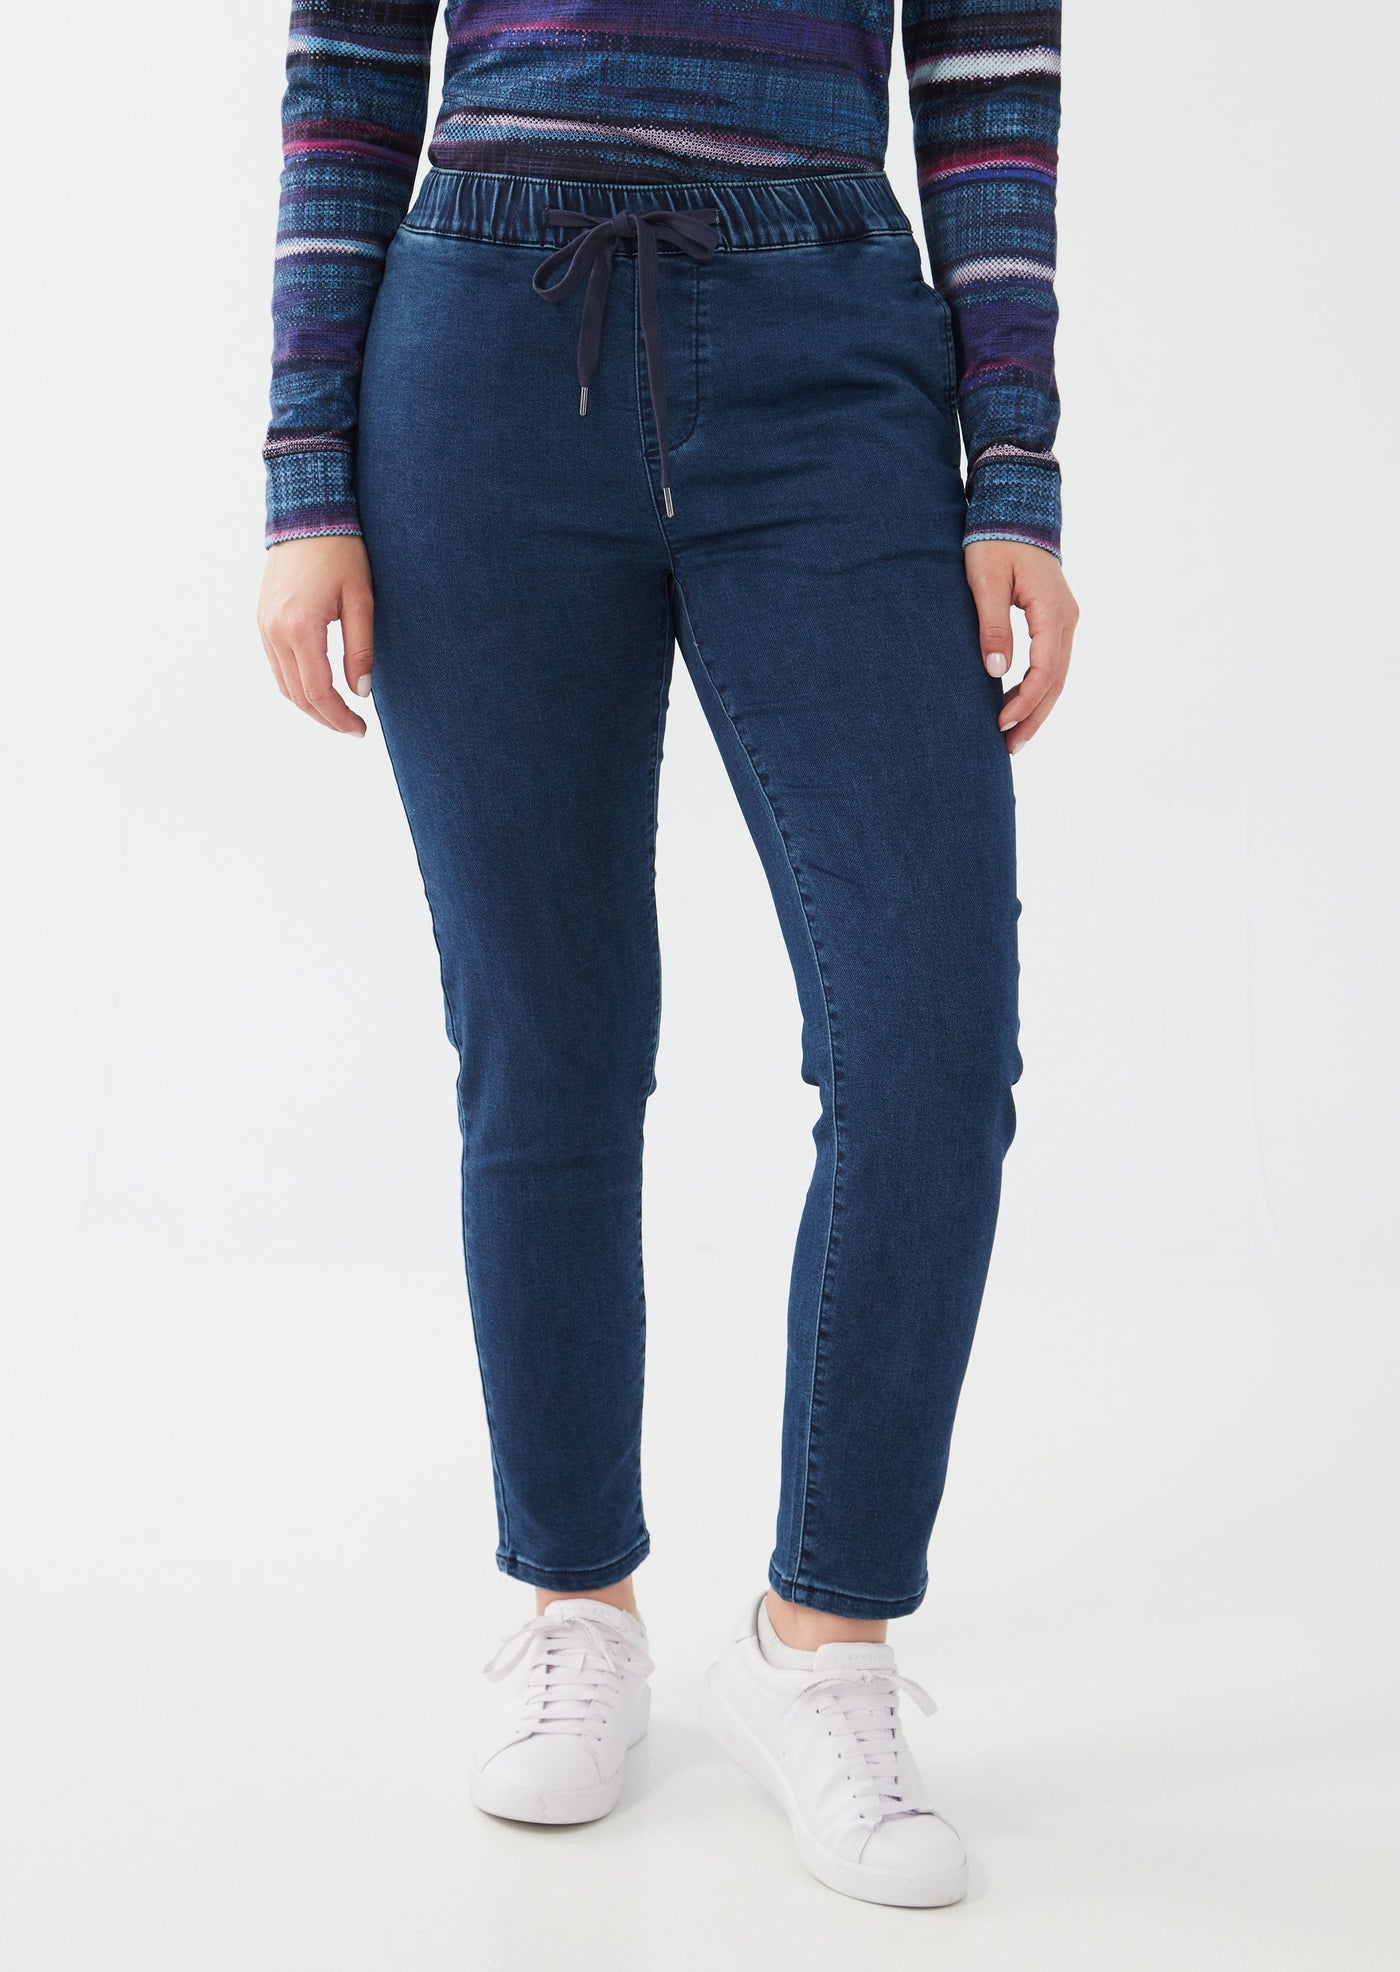 French Dressing Jeans - Pull On Jogger